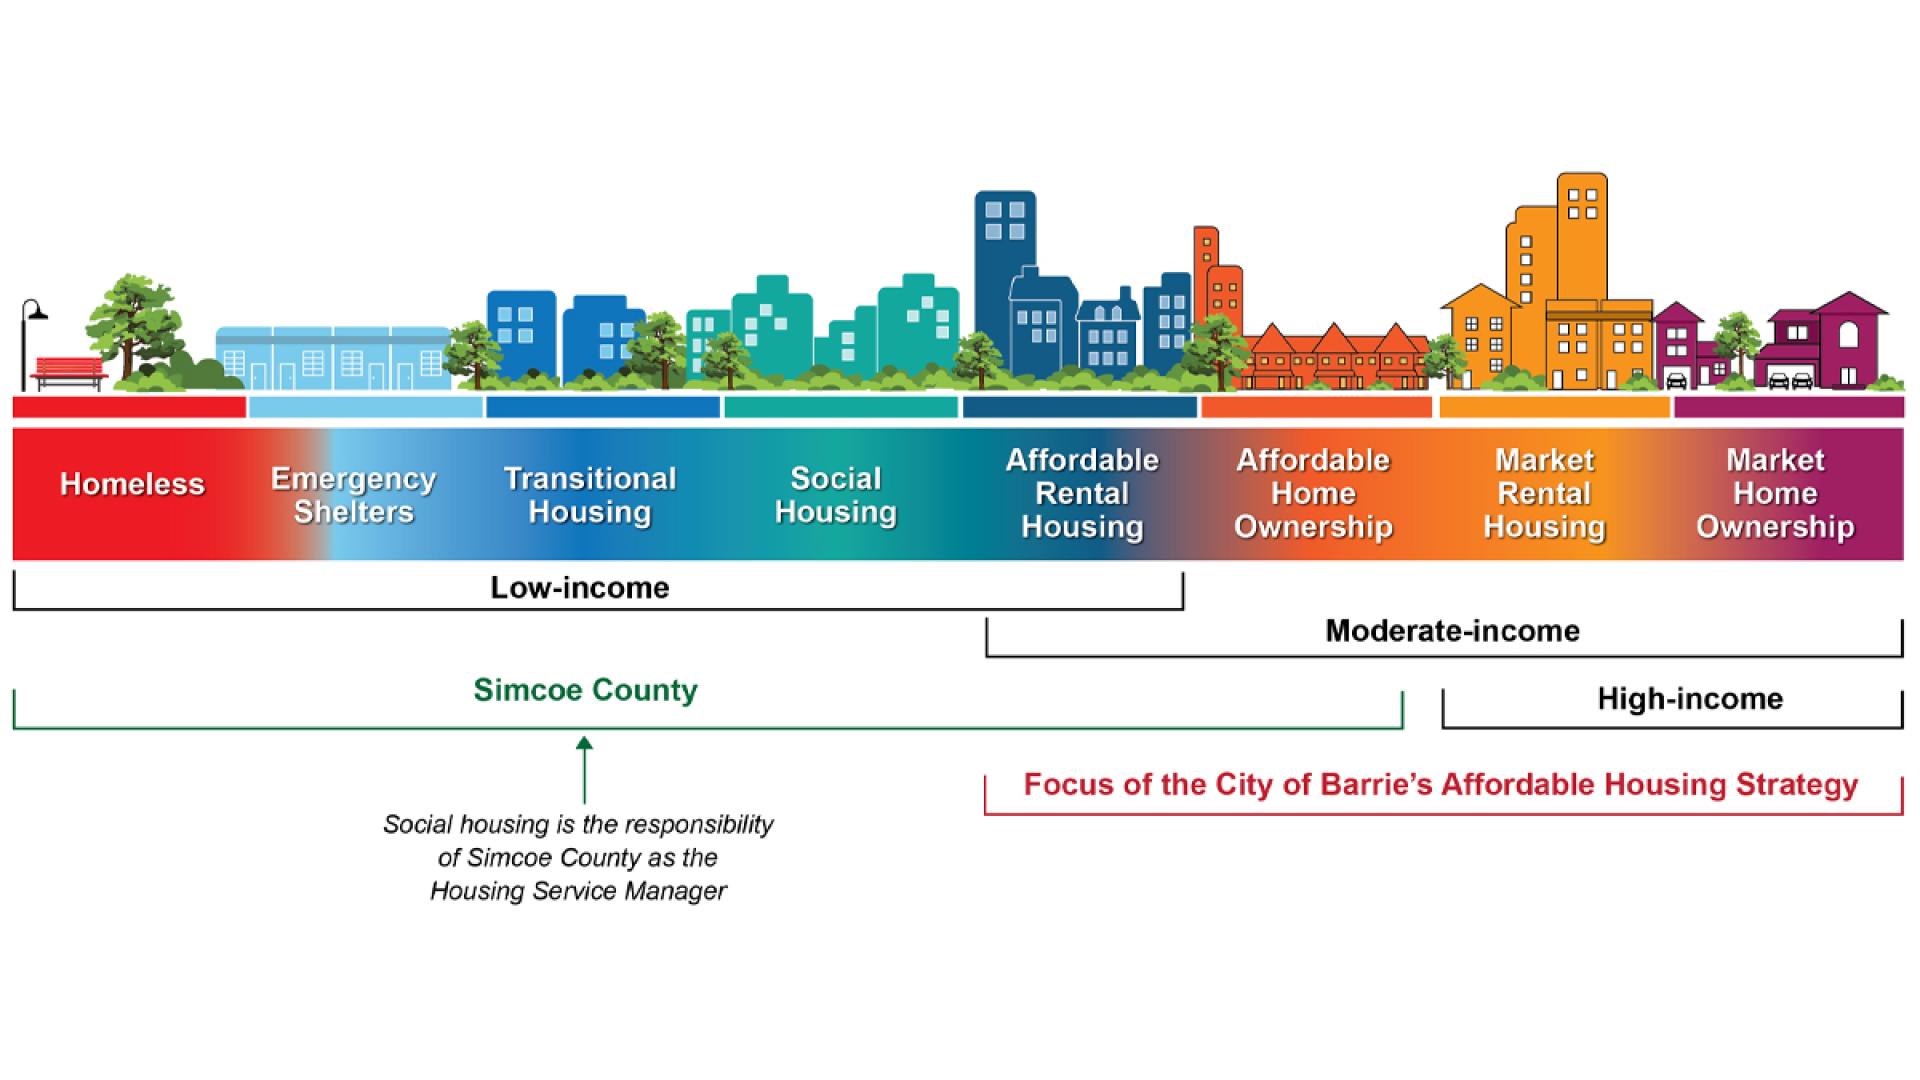 Graphic showing the focus of the City's Affordable Housing Strategy